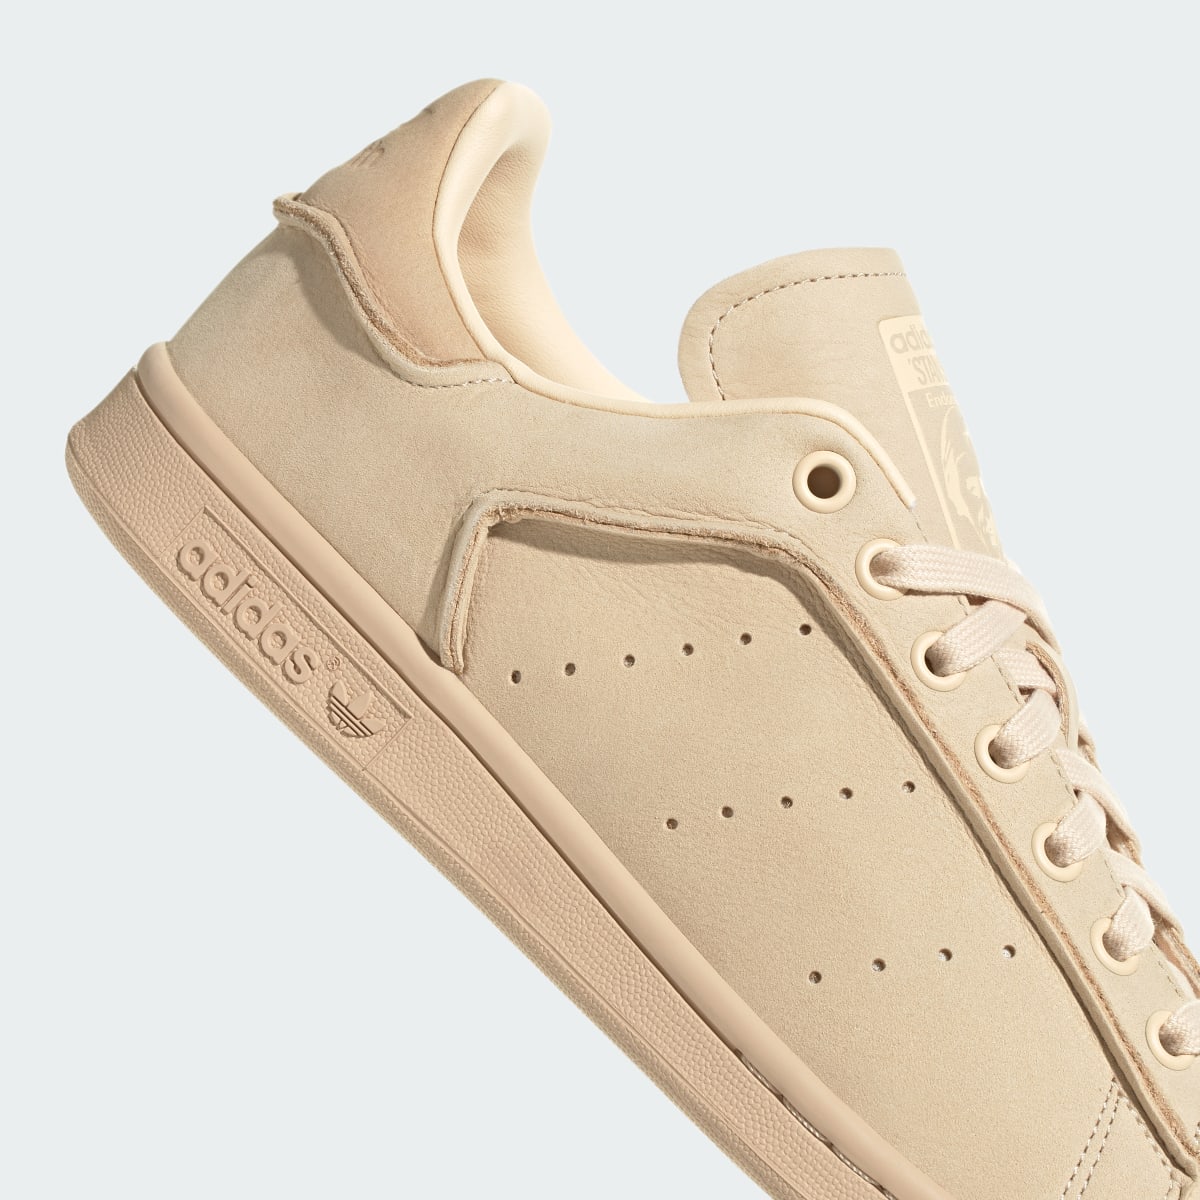 Adidas Stan Smith Luxe Shoes. 10